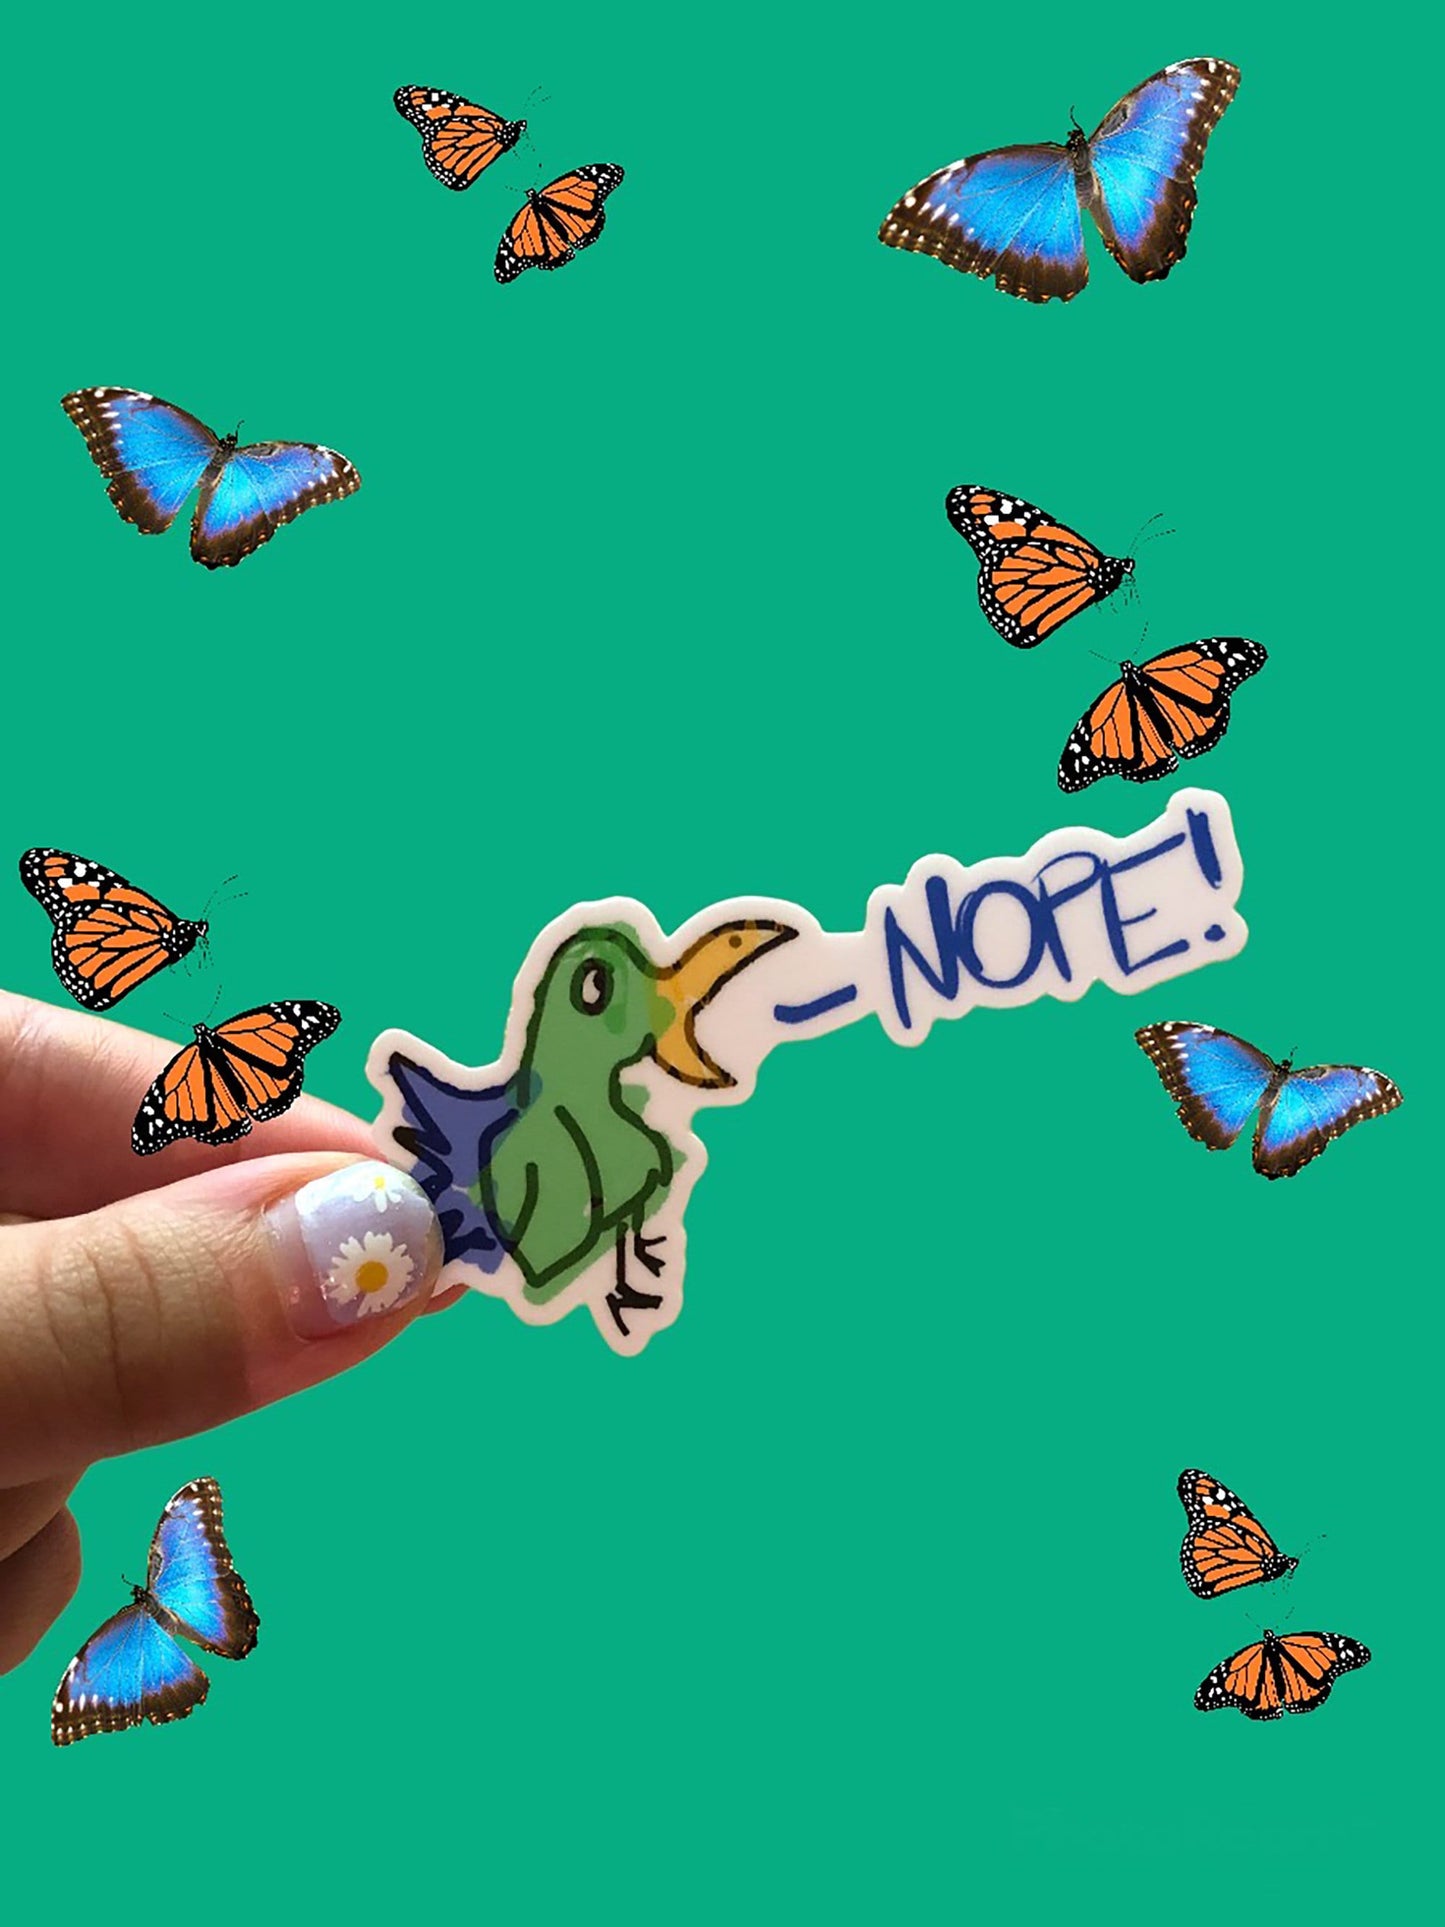 bird sticker, funny cartoon stickers, ironic vinyl stickers for laptop, nope stickers, humorous planner stickers, stickers for water bottle